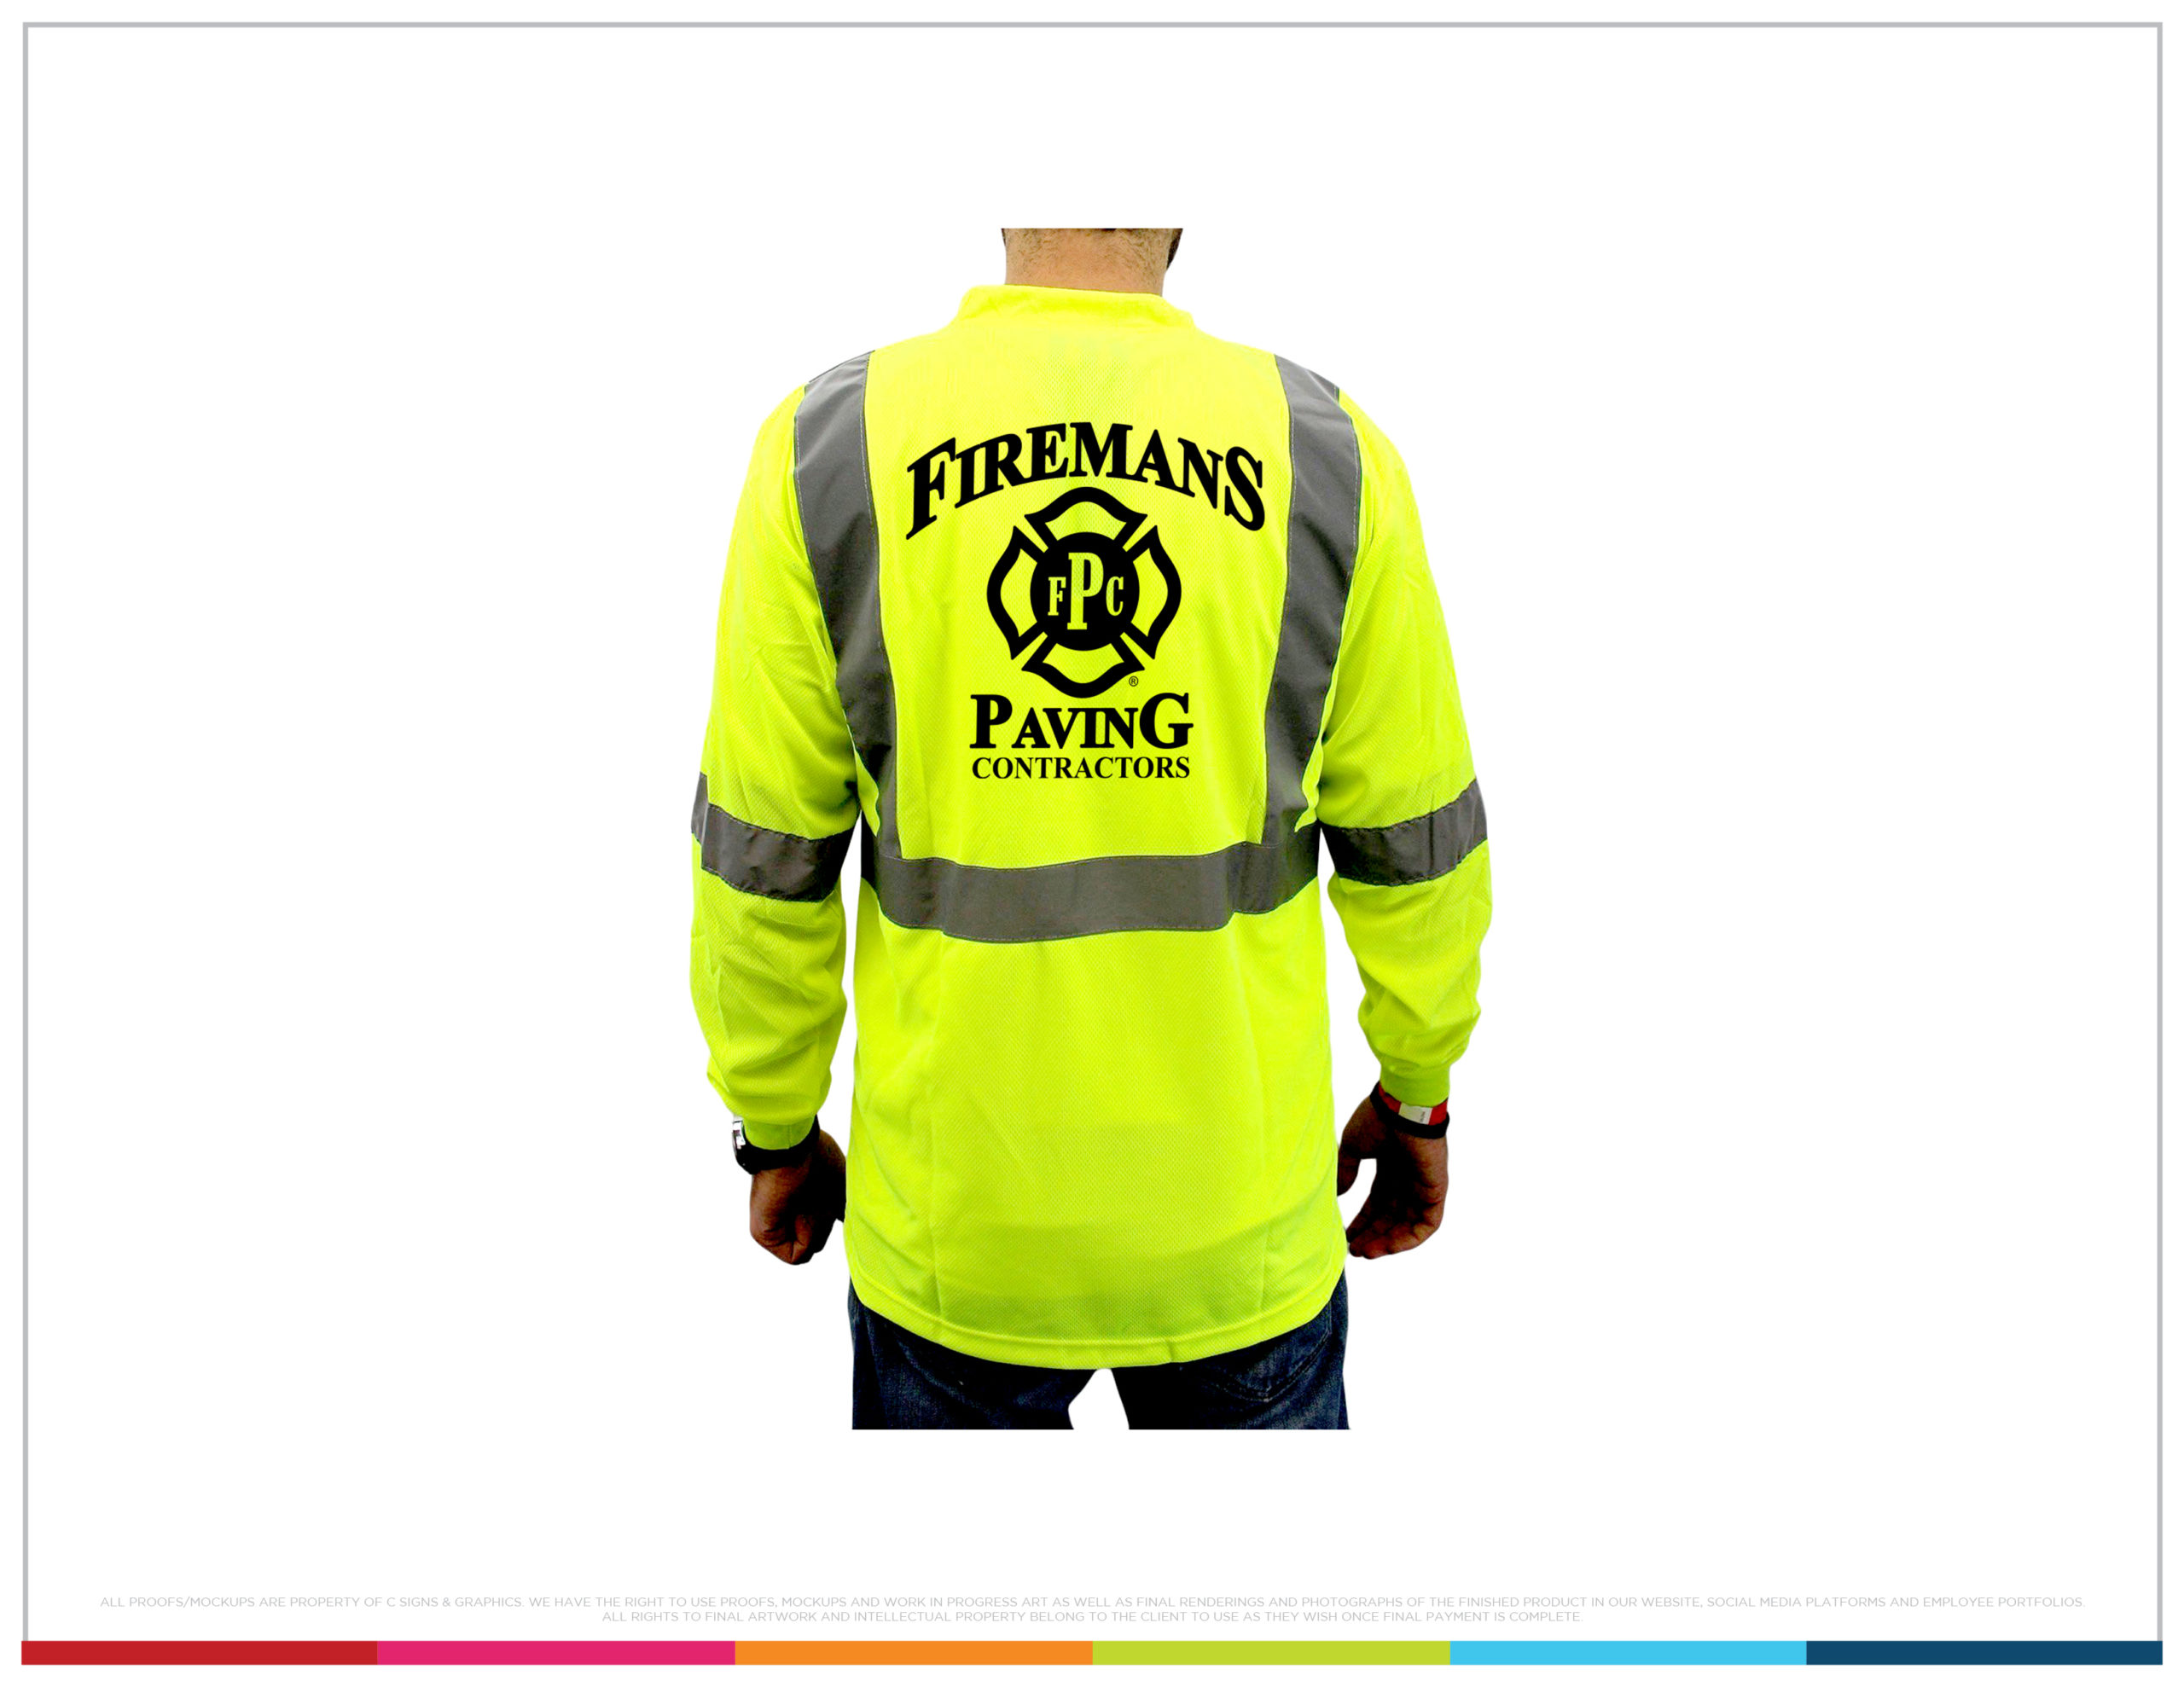 Yellow SAFETY APPAREL vest